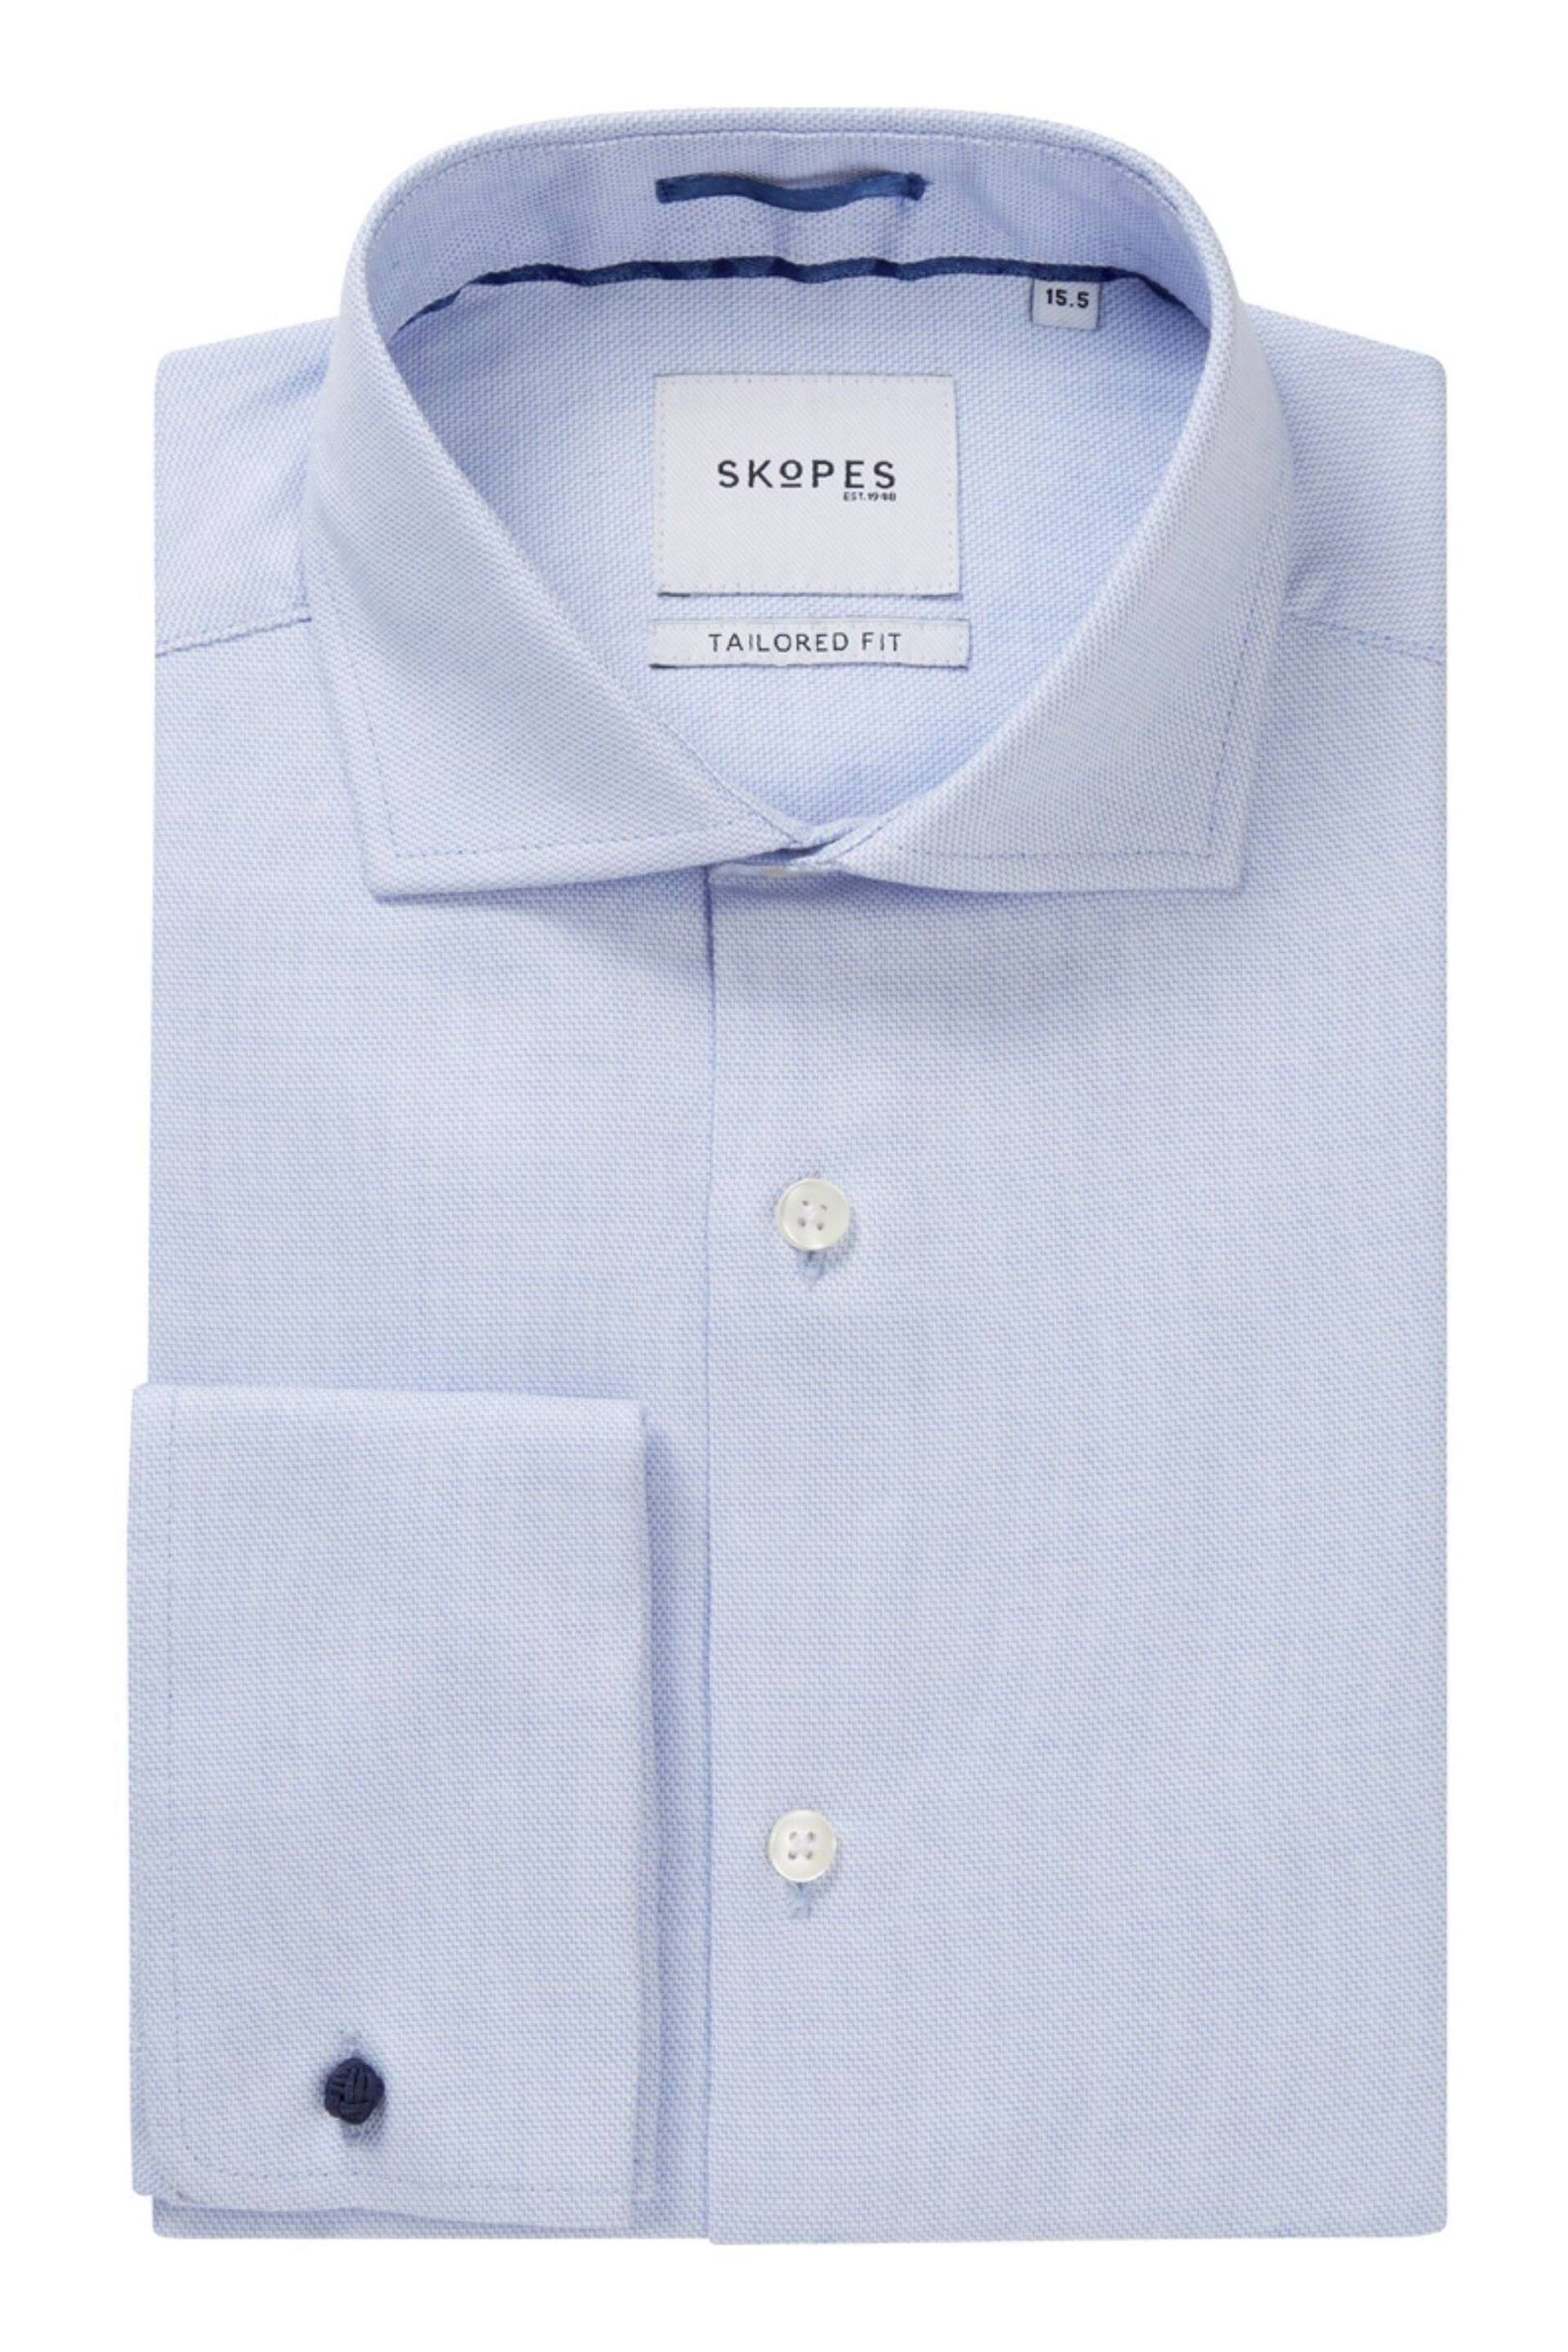 Skopes Tailored Fit Double Cuff Dobby Shirt - Image 7 of 10